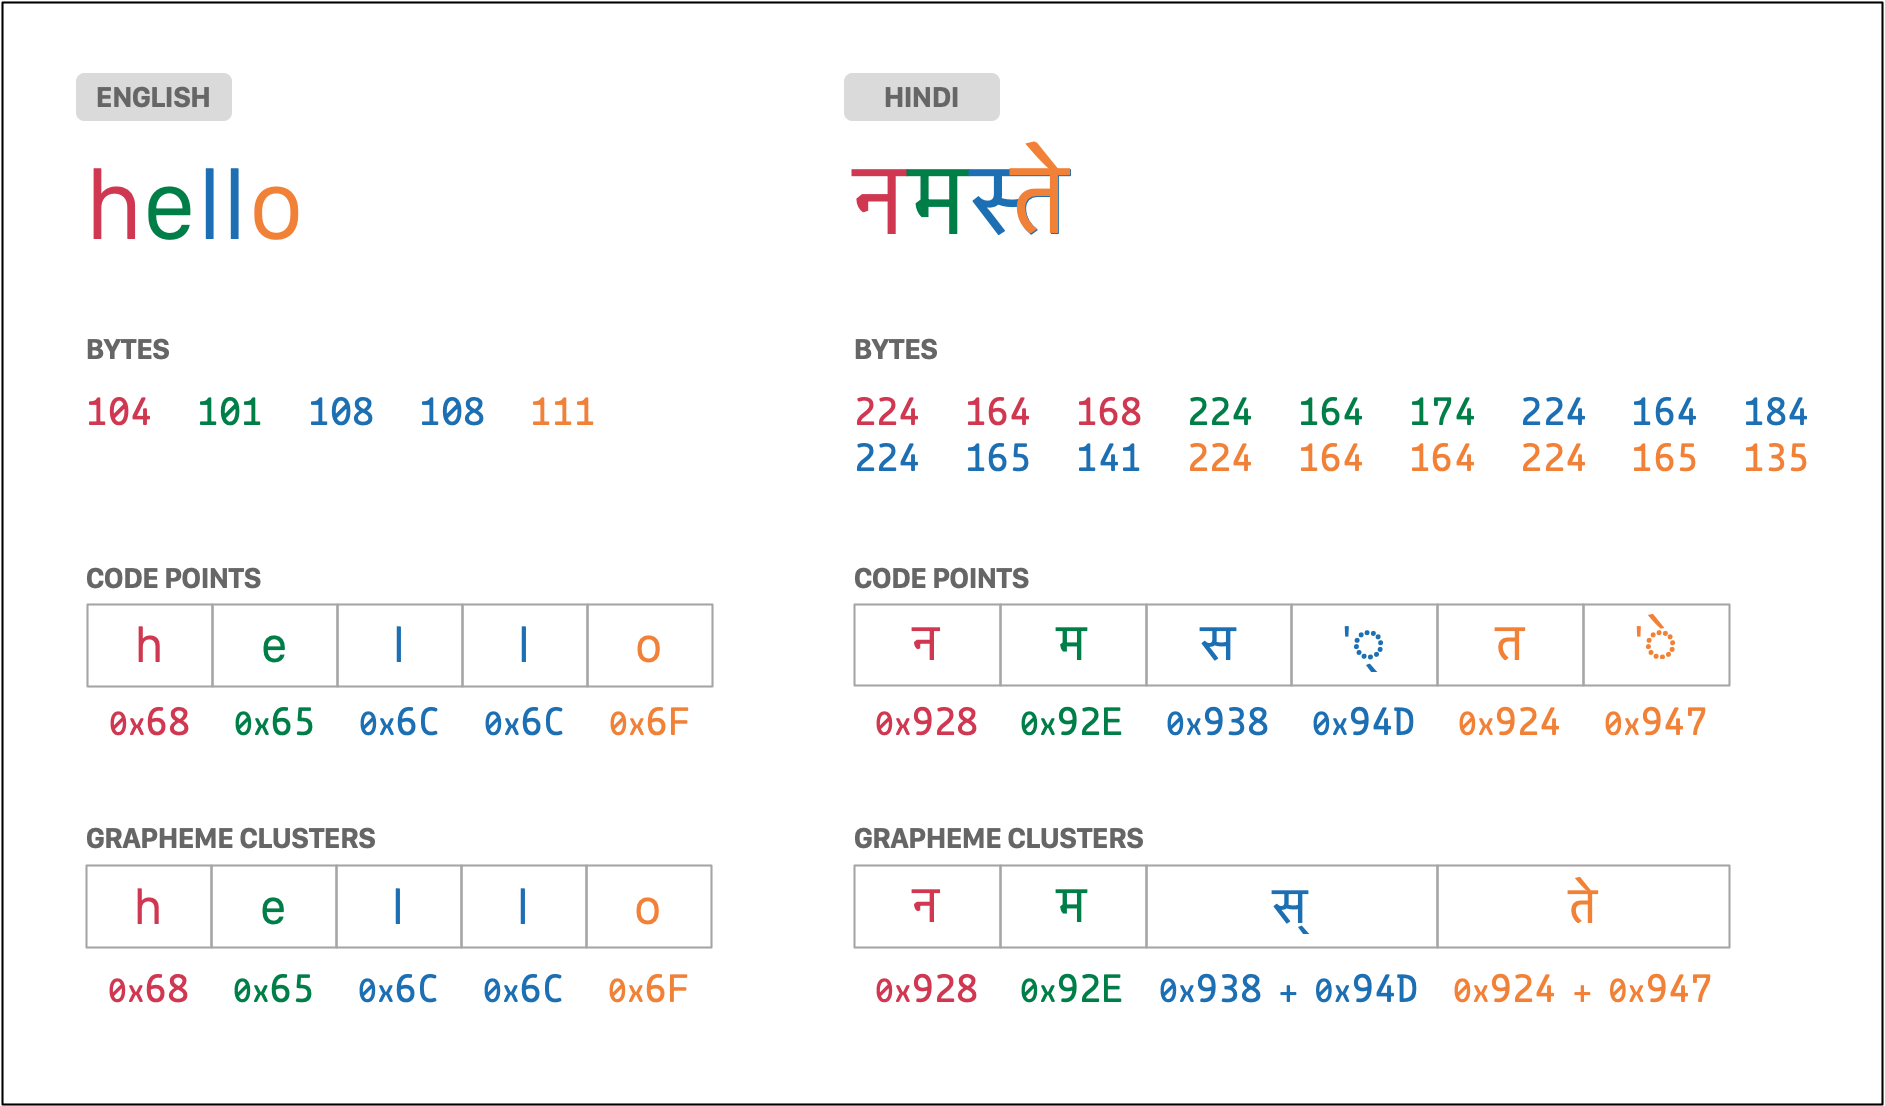 Each letter in "hello" is made up of one byte, one code point and one grapheme cluster. In the Hindi translation, the first two letters ("नम") take up three bytes, one code point and one grapheme cluster. The last letters ("स्ते") each take up six bytes, two code points and one grapheme cluster.